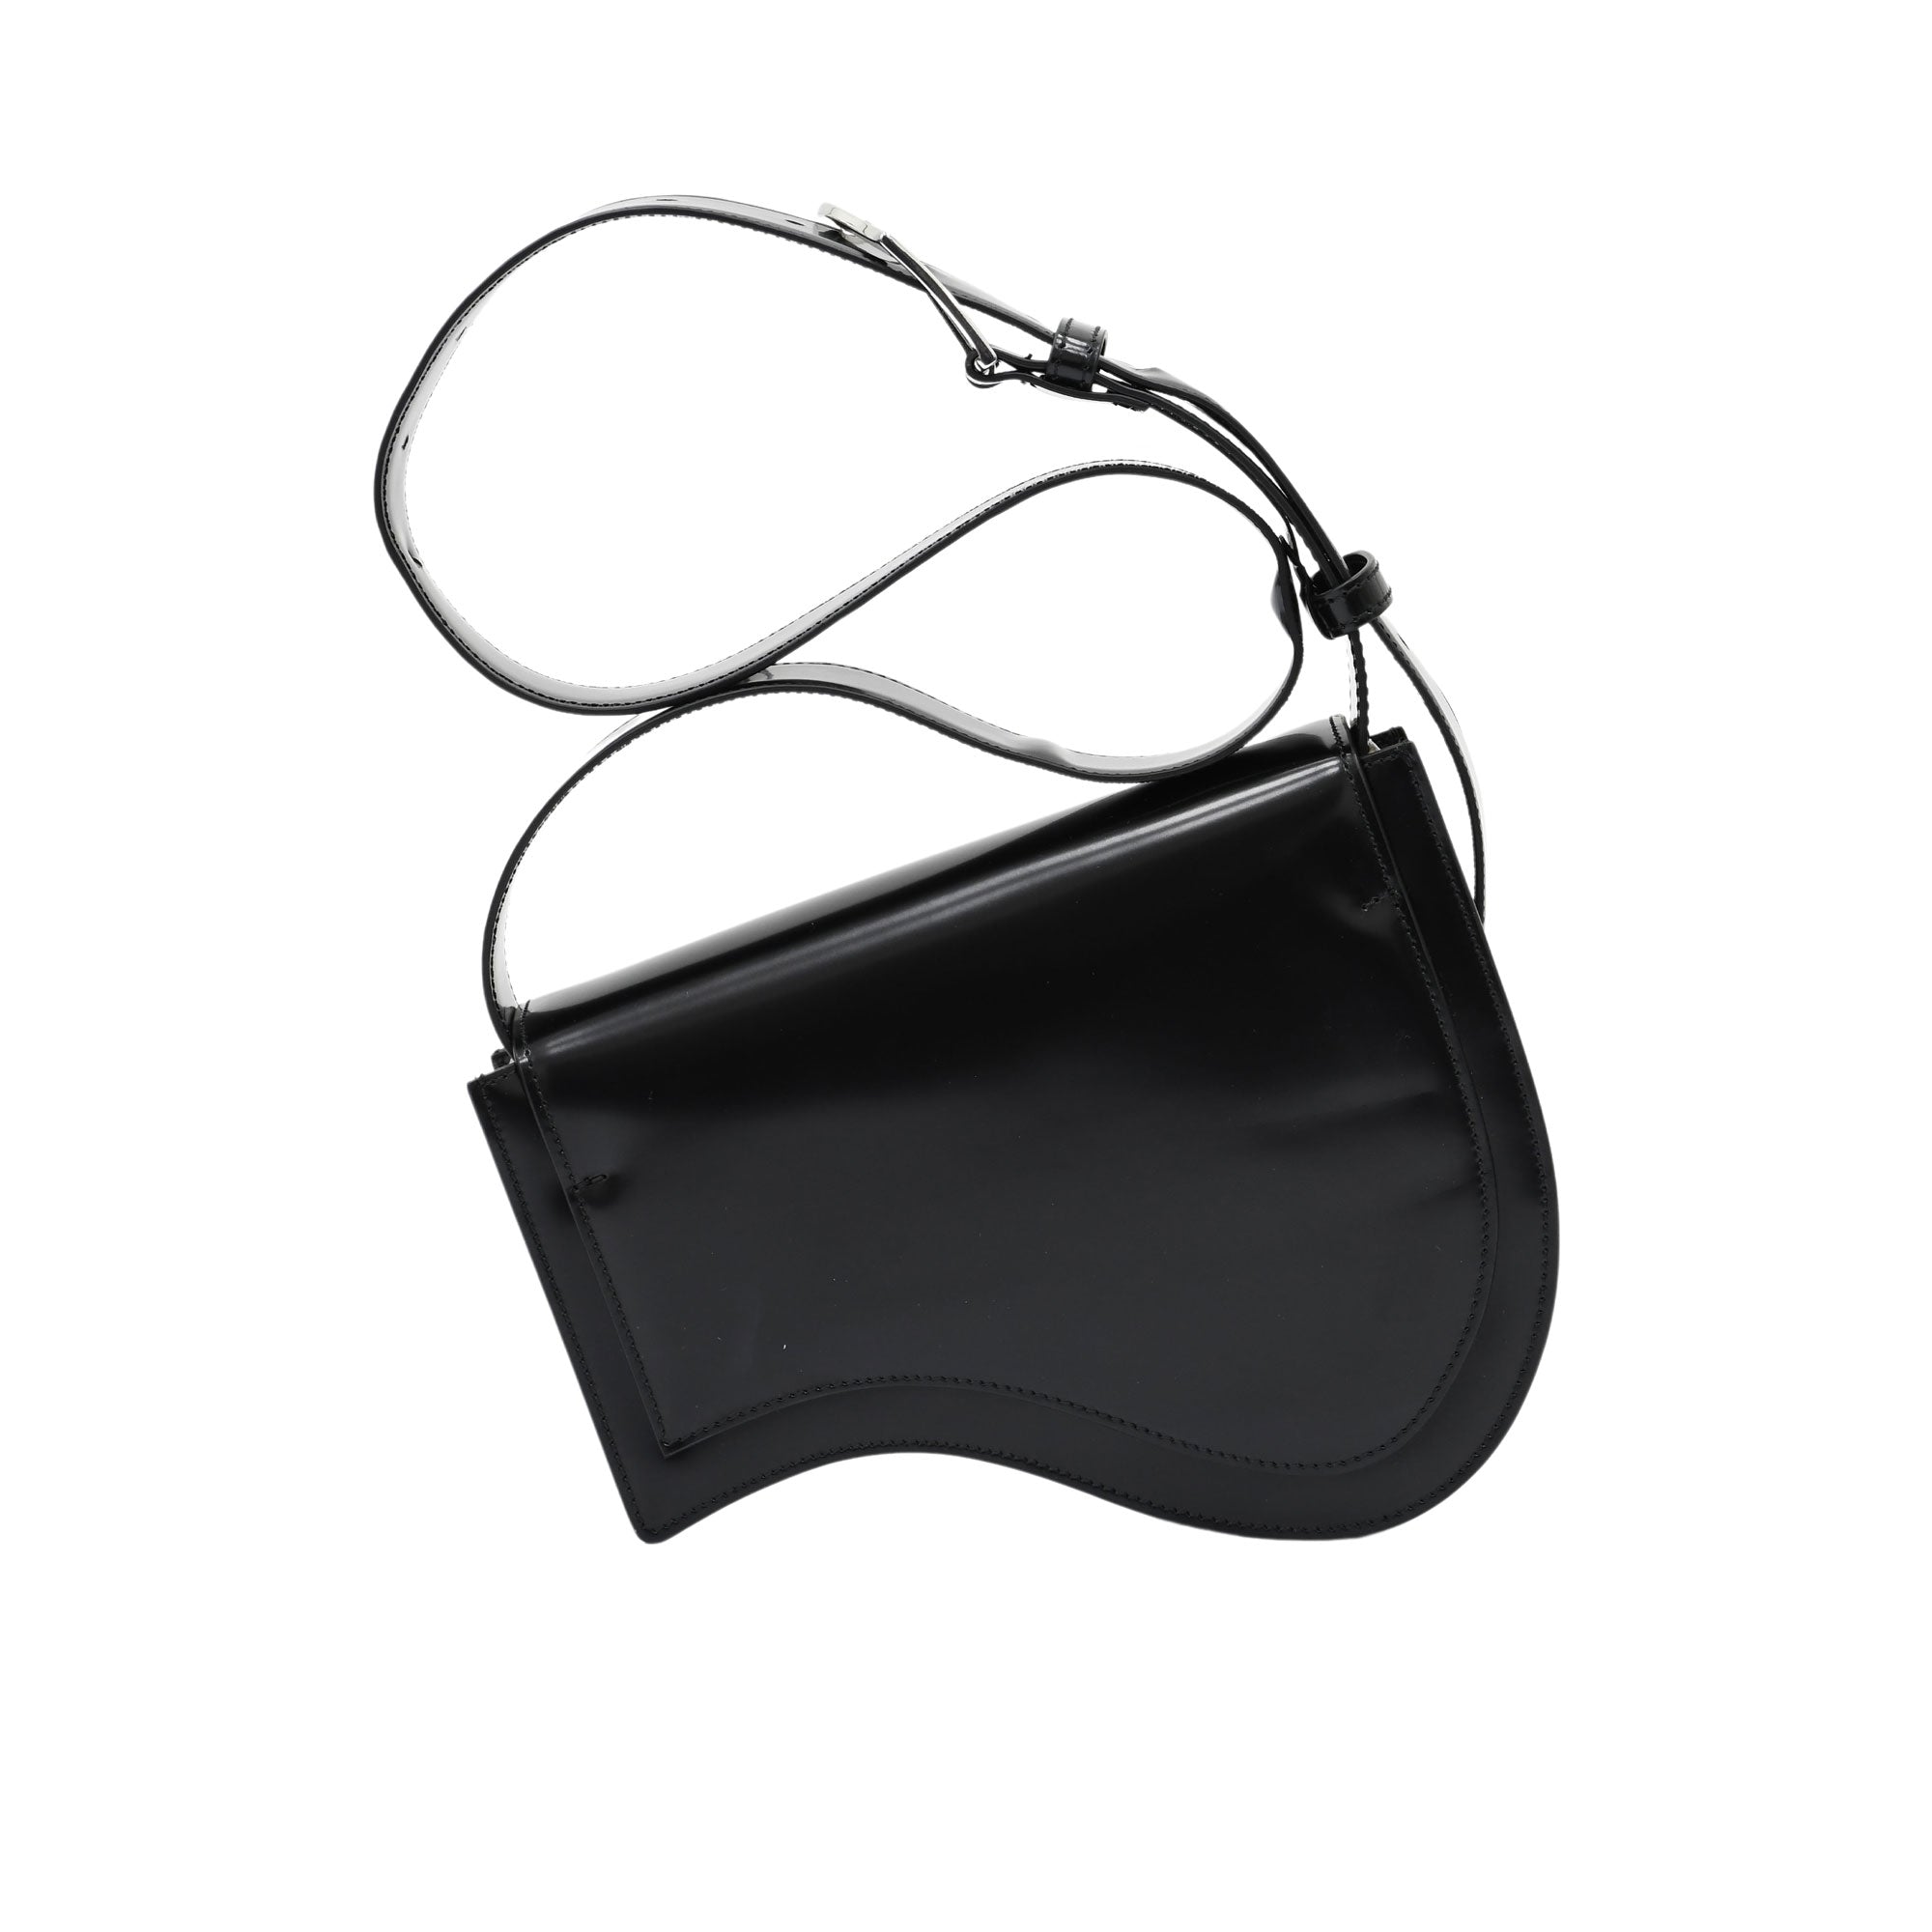 Anthony Group Women's Calf Leather Shoulder Bag